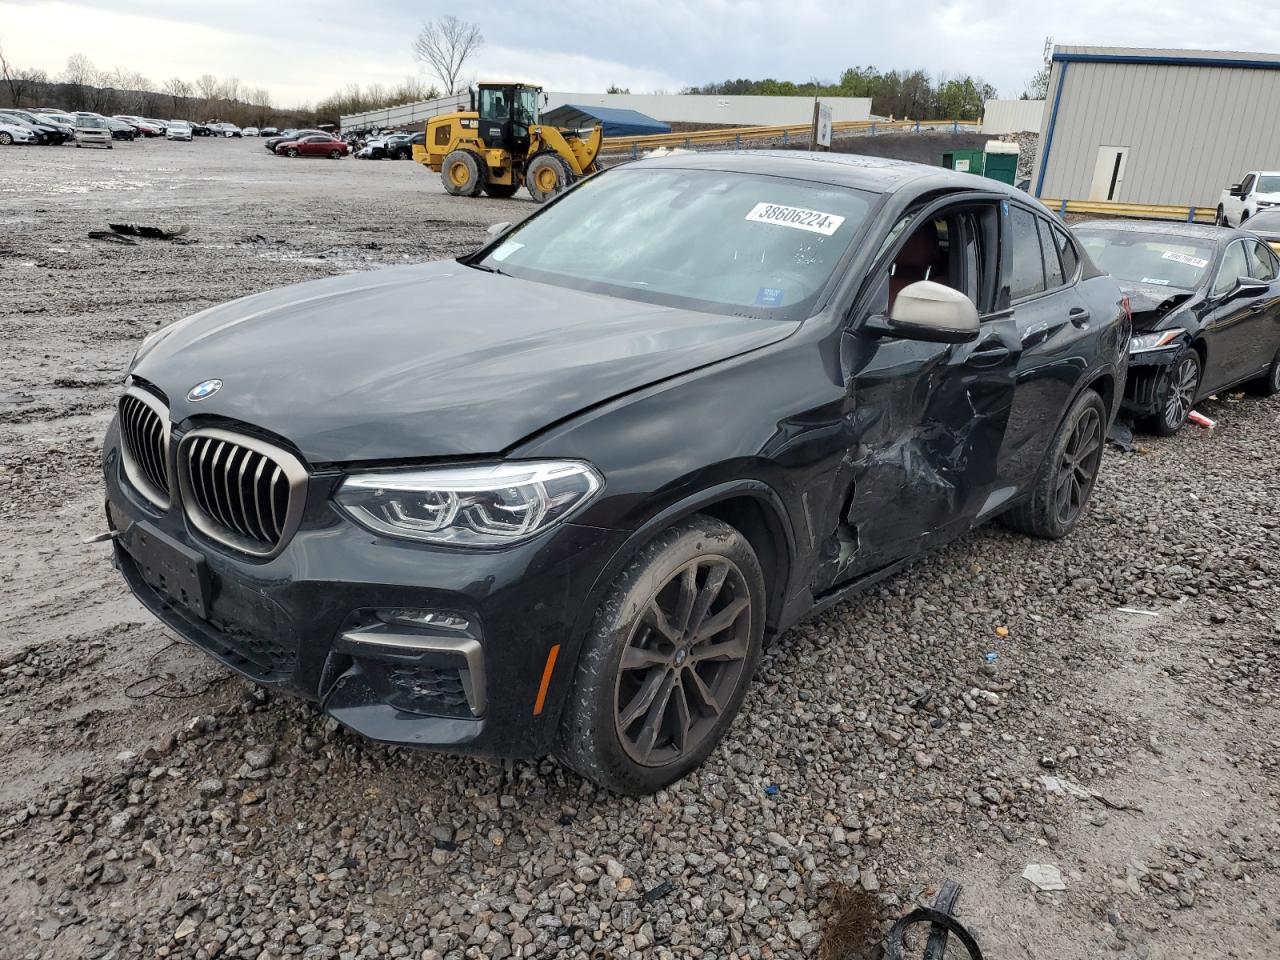 5UX2V5C08L9****** Salvage and Wrecked 2020 BMW X4 M in AL - Hueytown